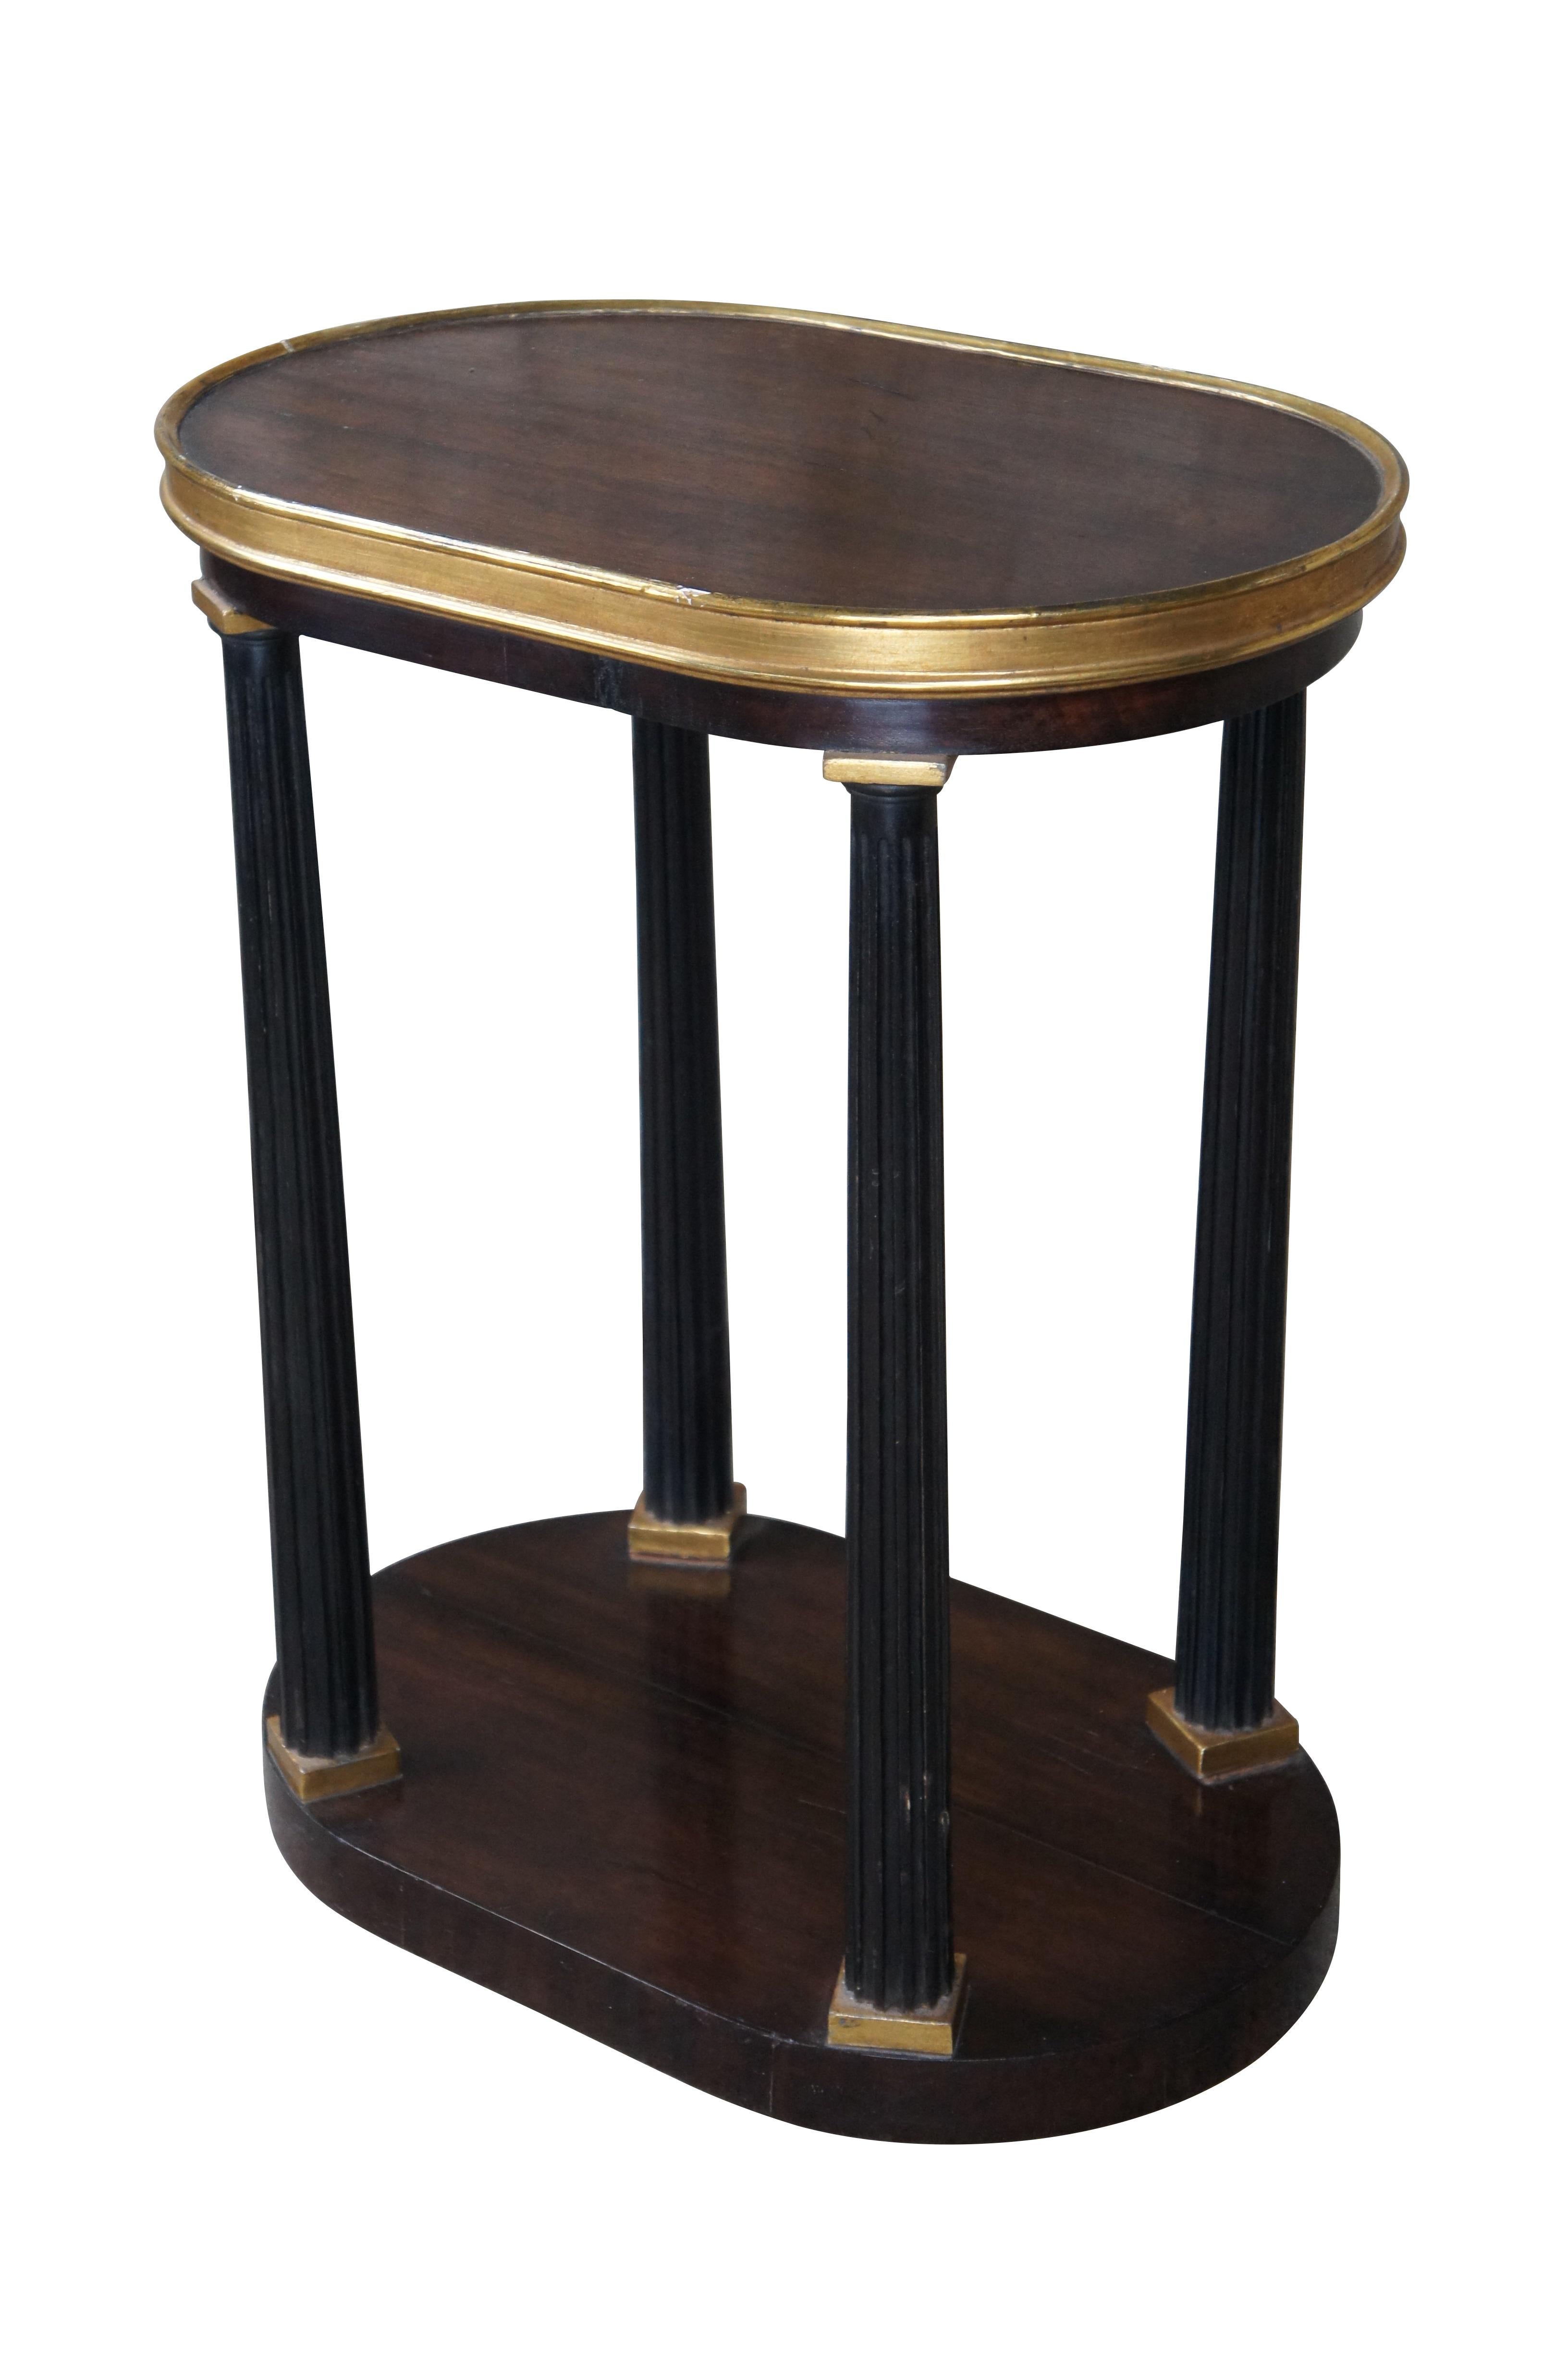 Dessin Fournir French Empire Style Mahogany Ebonized Gold Leaf Romney Side Table In Good Condition For Sale In Dayton, OH